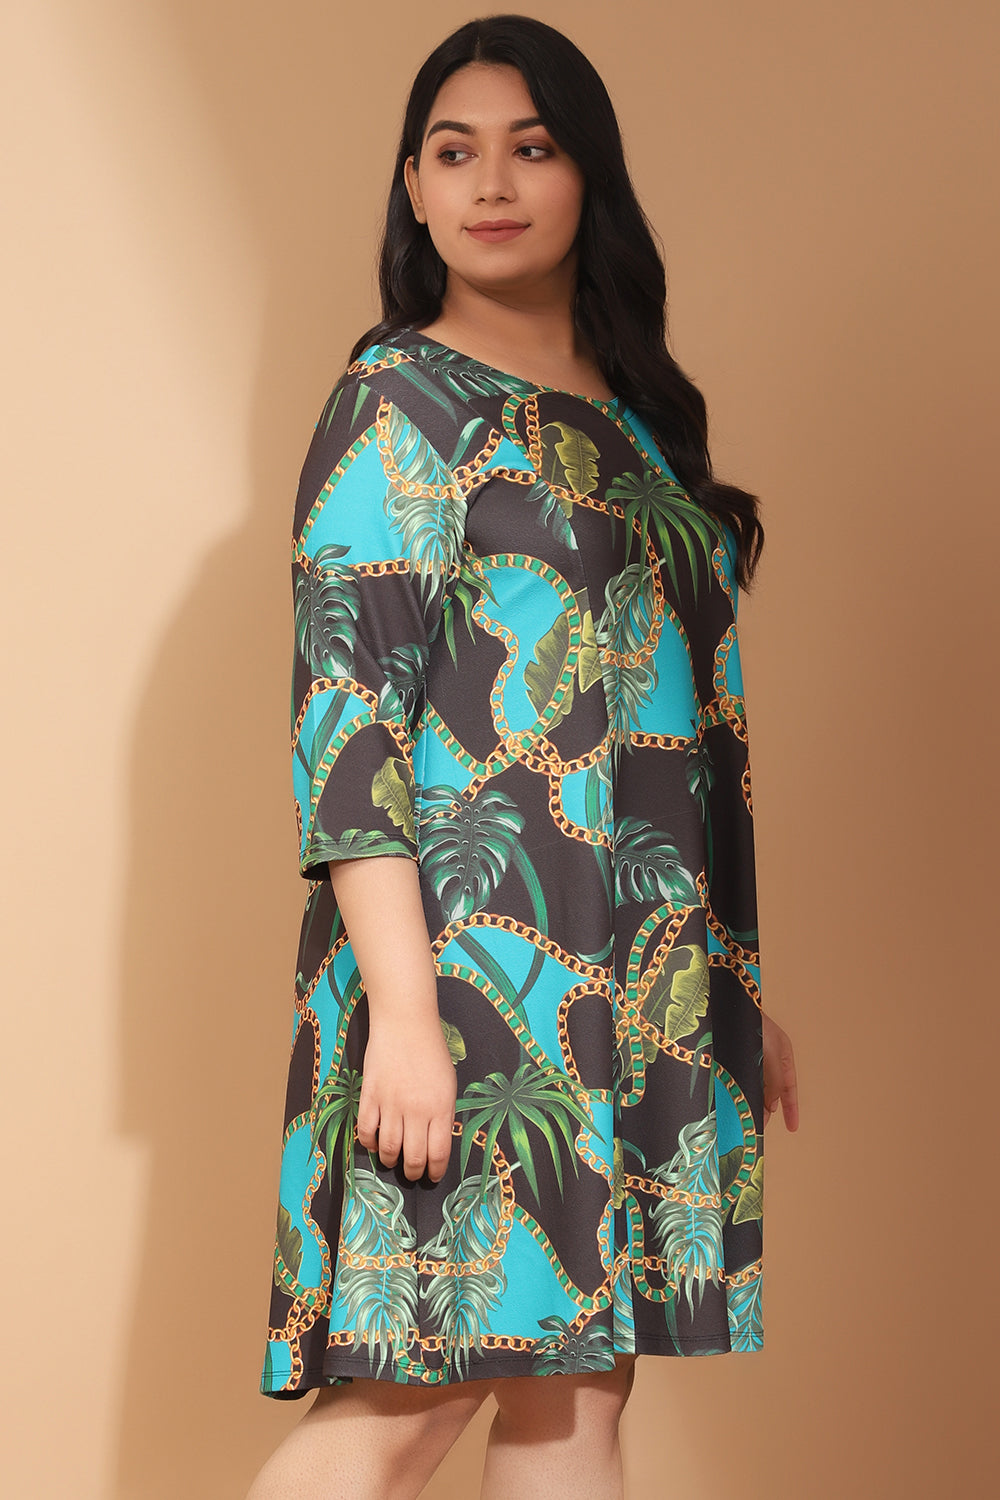 Teal Forest Inpired Printed Dress